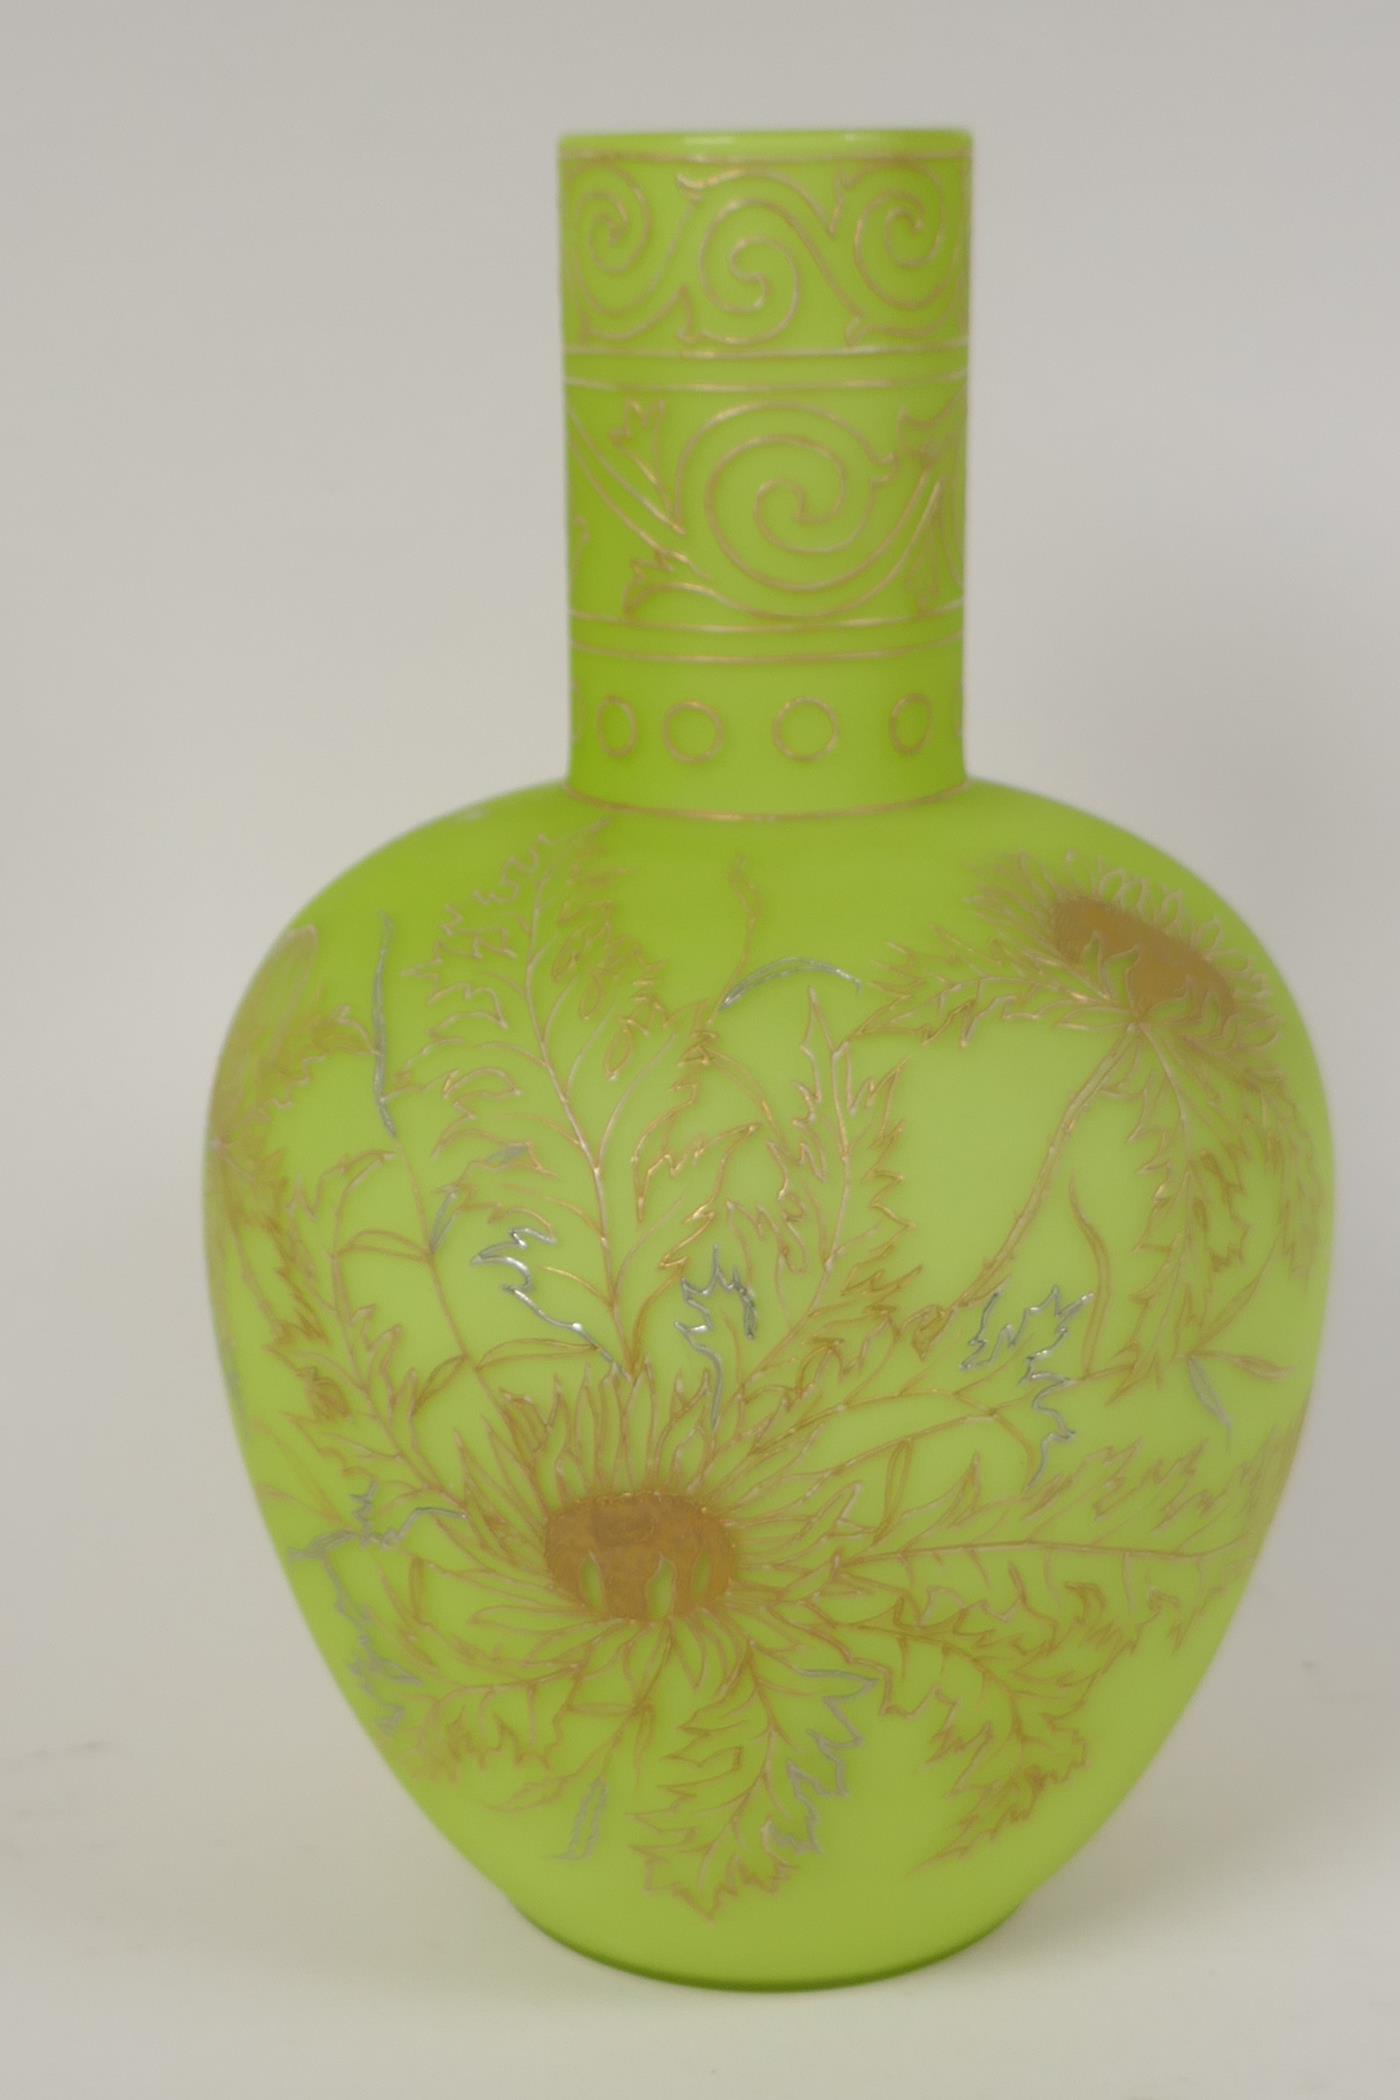 A C19th satin glass vase with delicate applied gilt floral decoration 10" high - Image 3 of 6